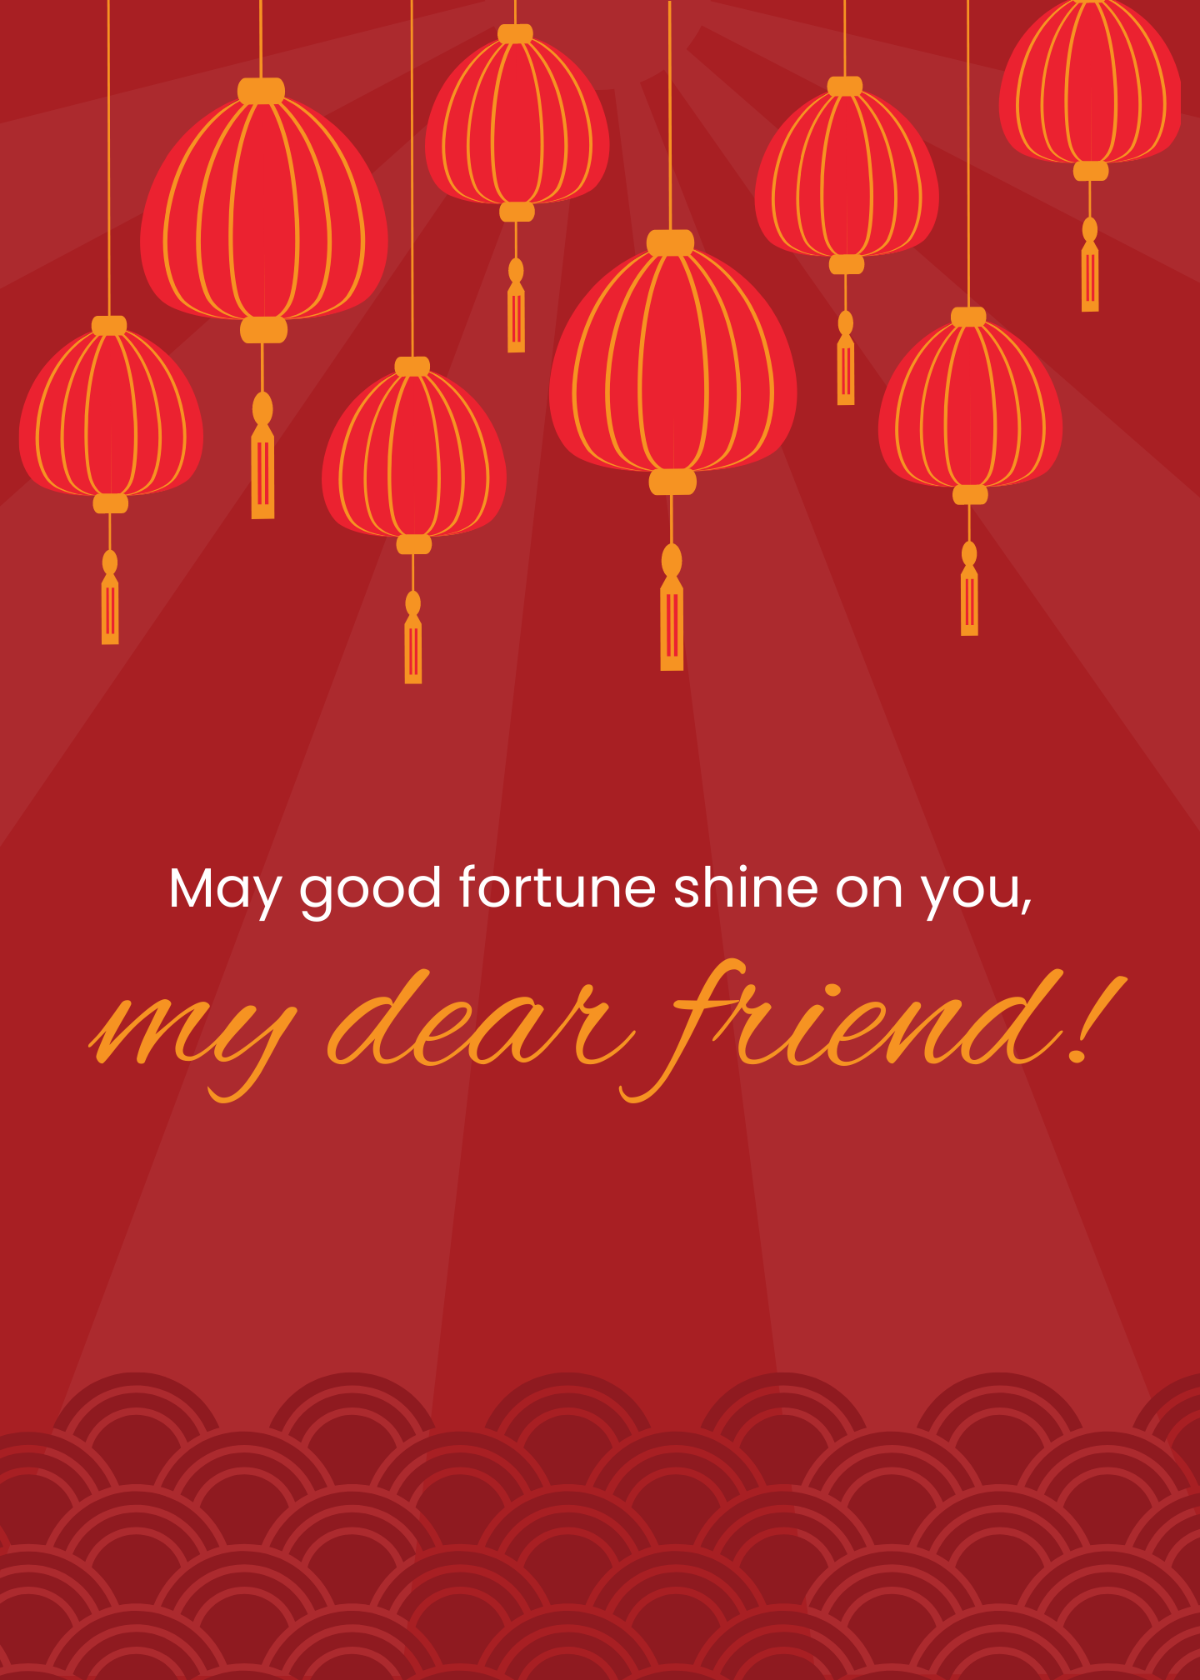 Chinese New Year Wishes For Friend Template